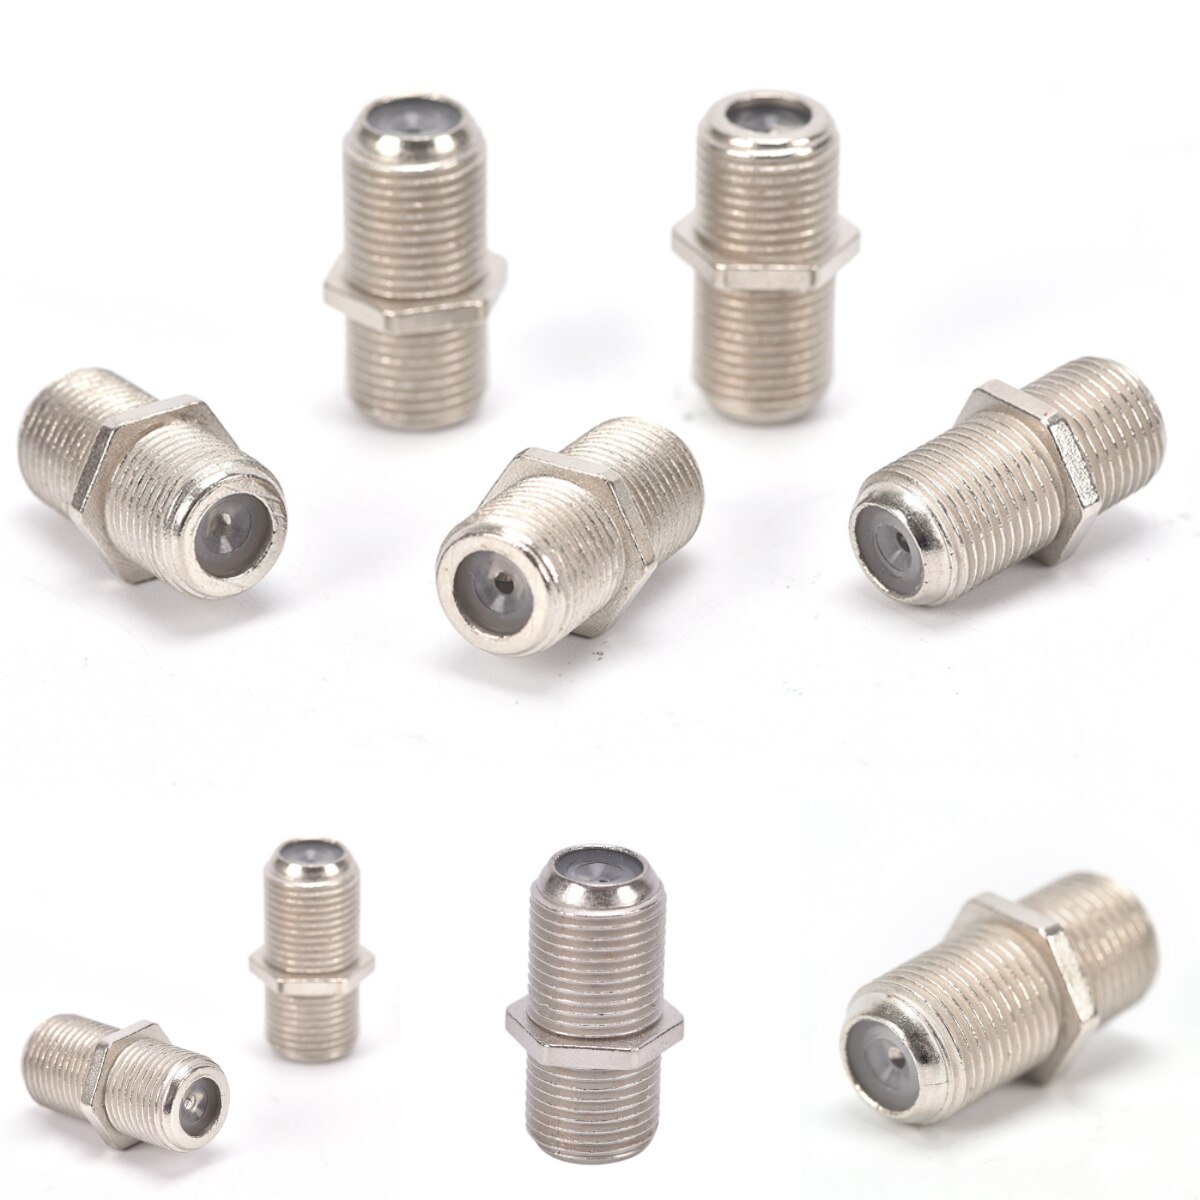 10pcs F Type Coupler Adapter Connector Female F/F Jack RG6 Coax Coaxial Cable Used In Video Or 1pcs SMA RF Coax Connector Plug